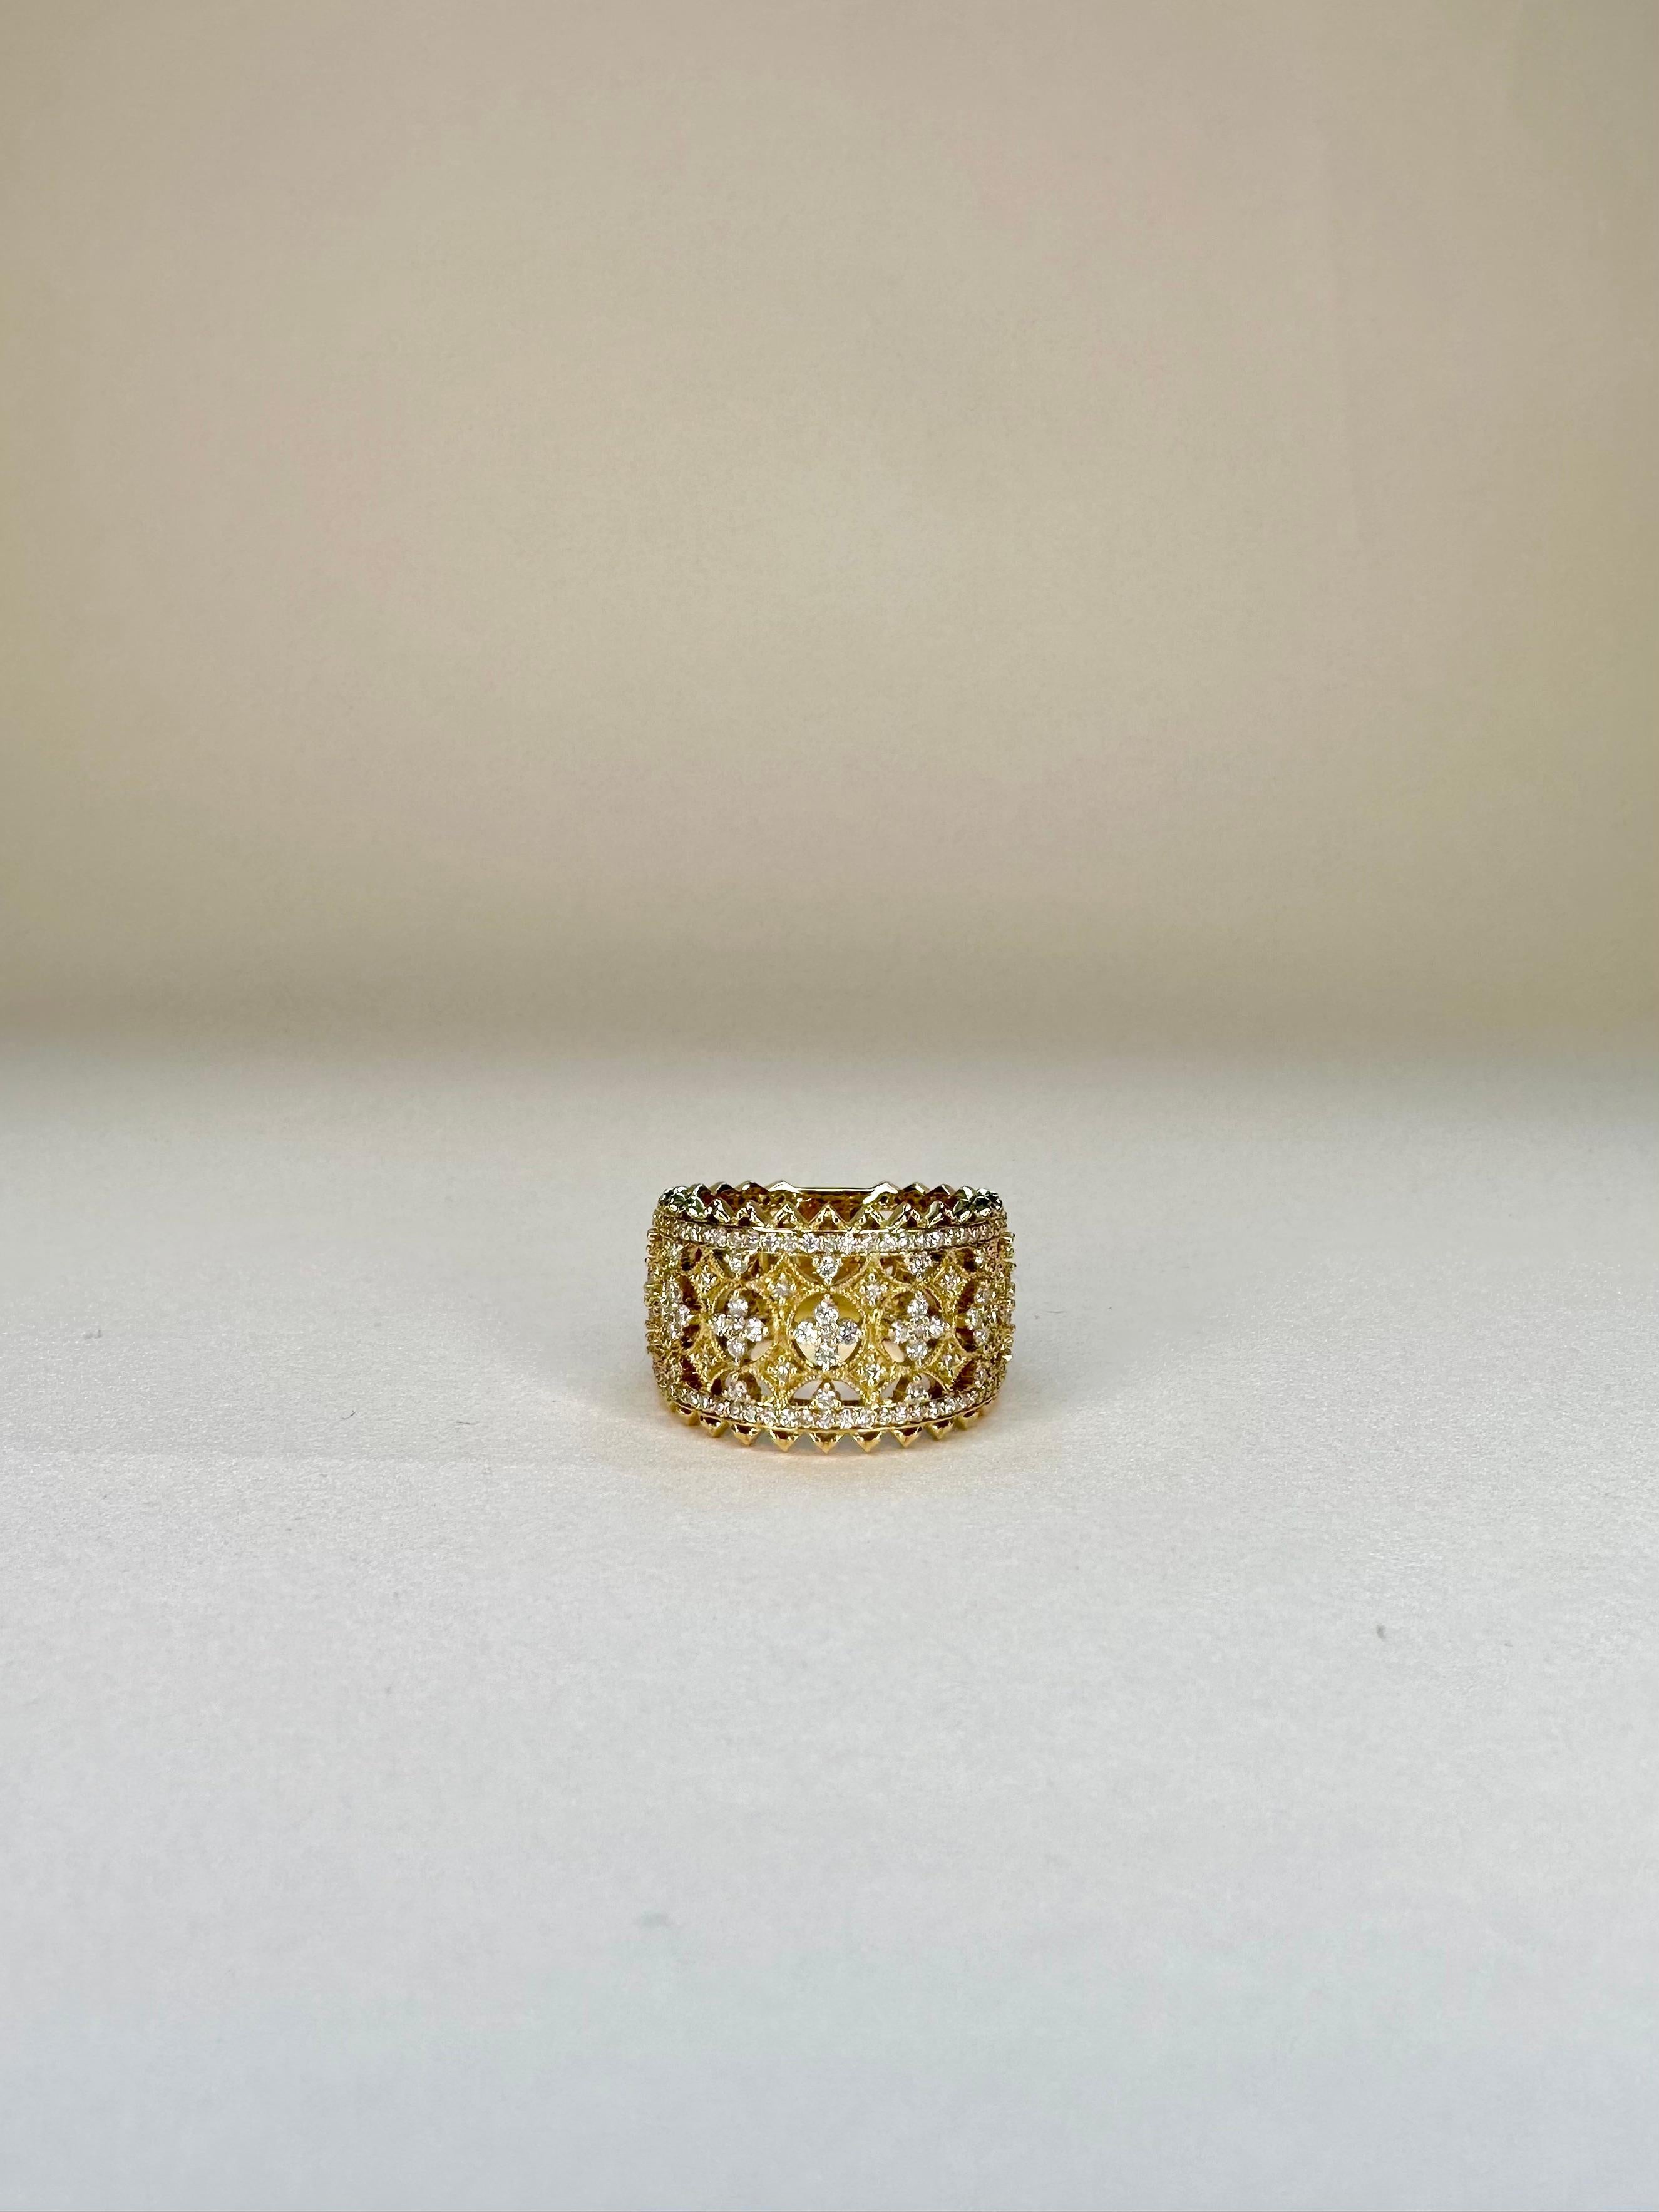 For Sale:  18k Yellow Gold Lace Band Ring With 1.10 Carats Of Diamonds Milgrain Setting 5